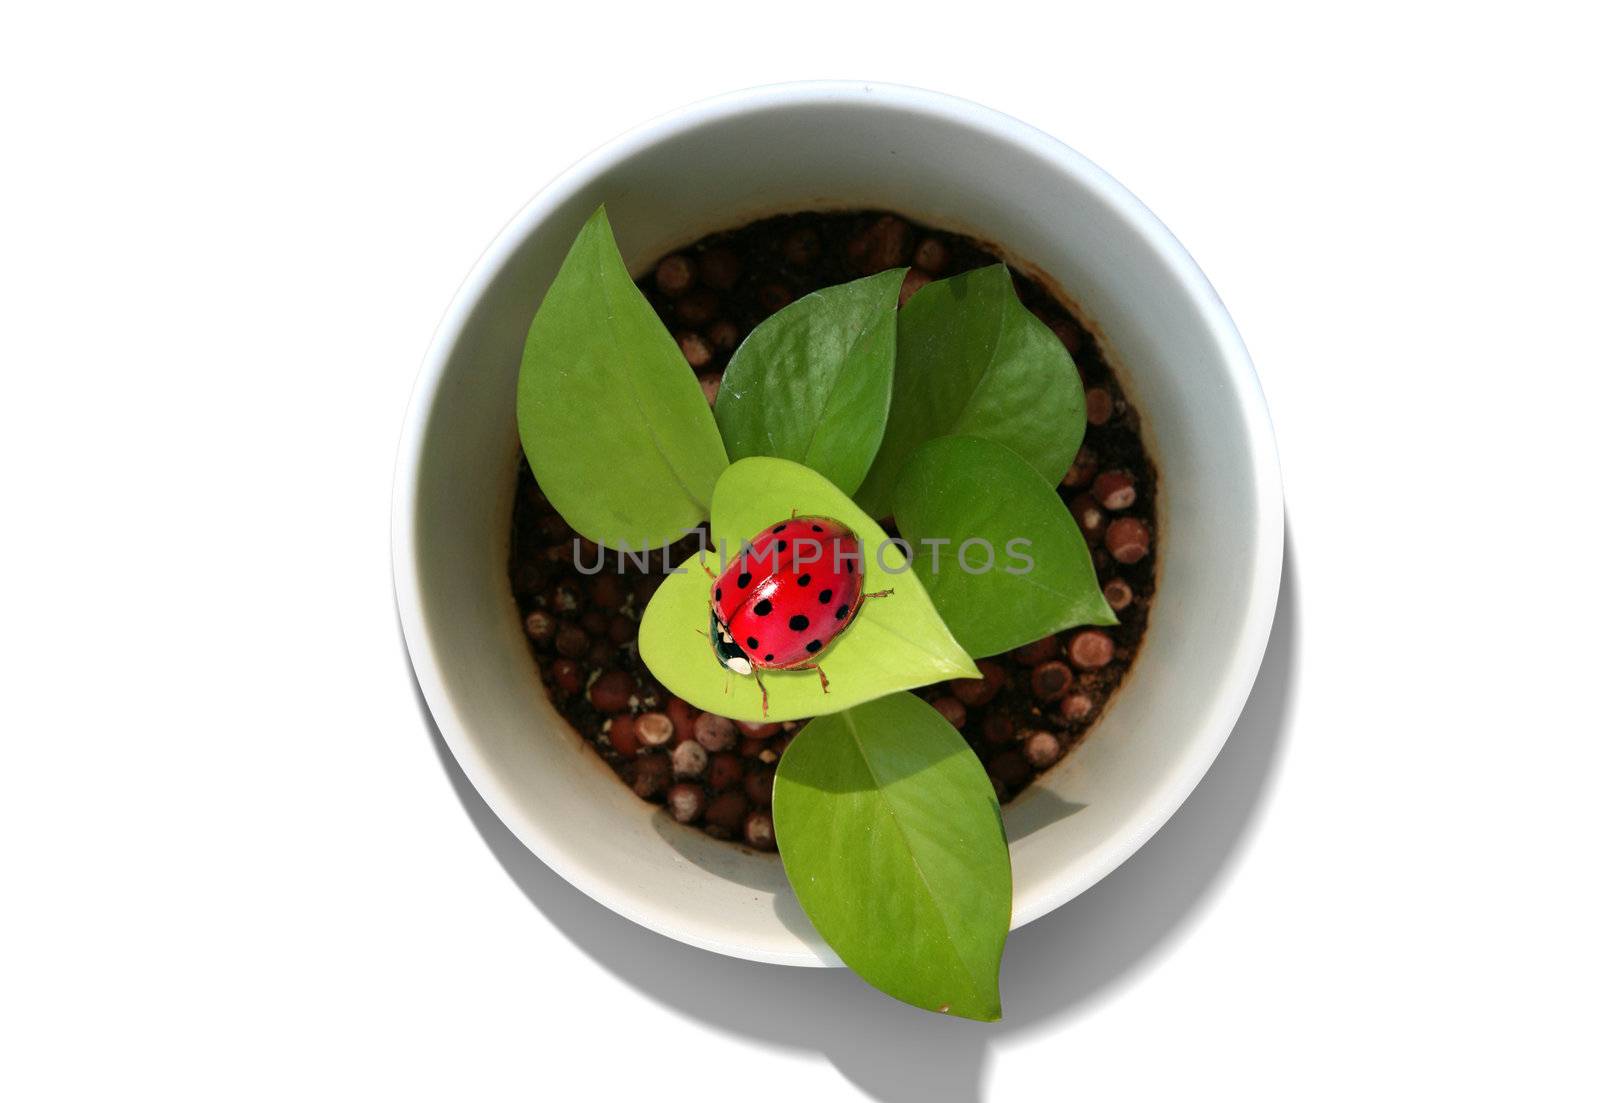 A plant in a cup and ladybird on it